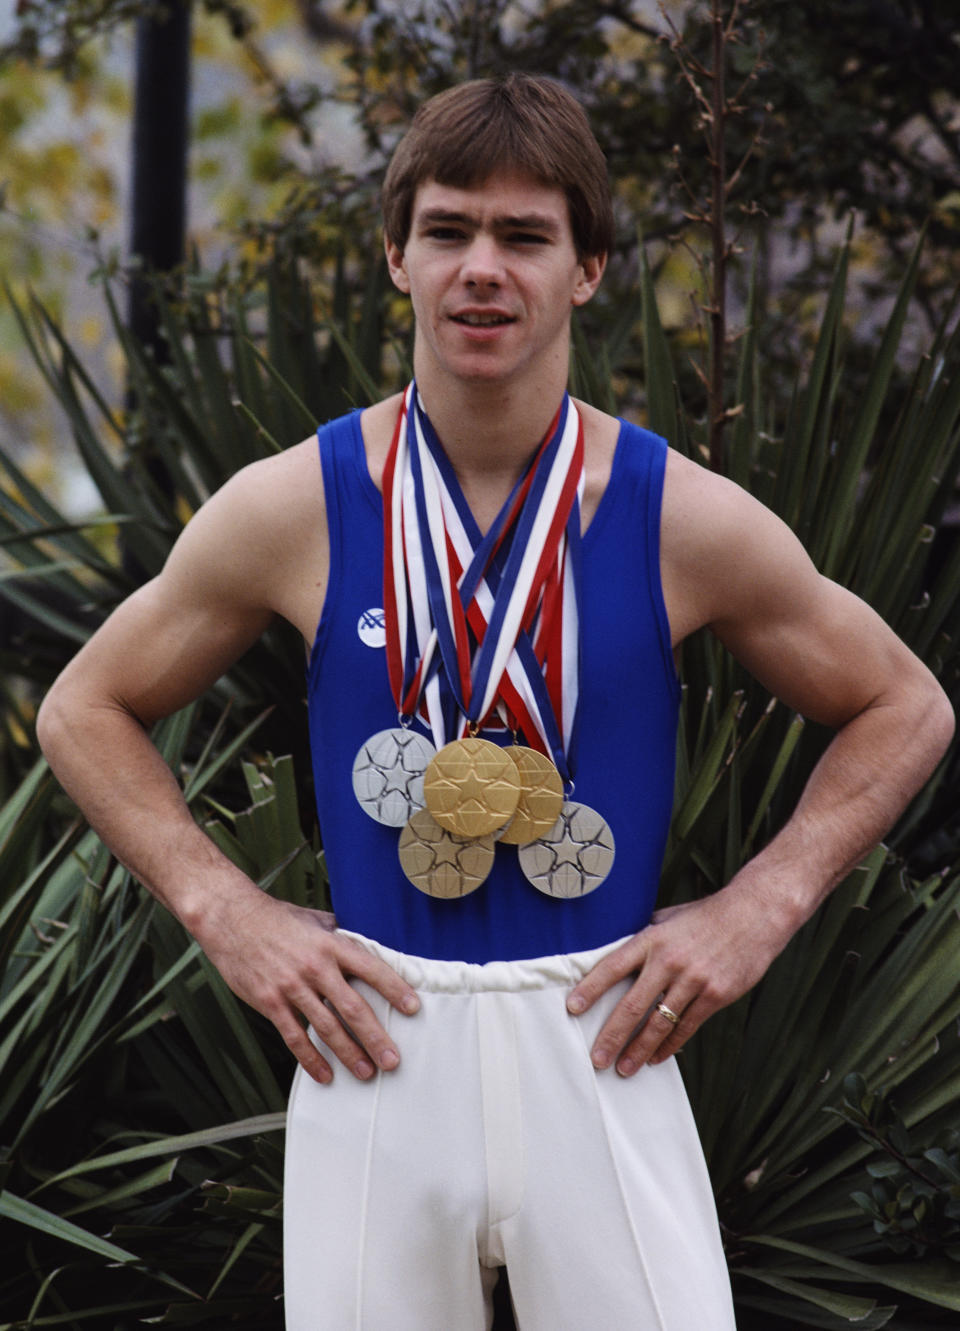 The first American to win a gymnastics gold medal at the world championships, Thomas died from a stroke. He was 64. Thomas competed for the U.S. at the 1976 Olympics but made history two years later when he won gold at the world championships. A year later he upped the ante with a record six gold medals at worlds, a mark that's since been tied by Simone Biles.